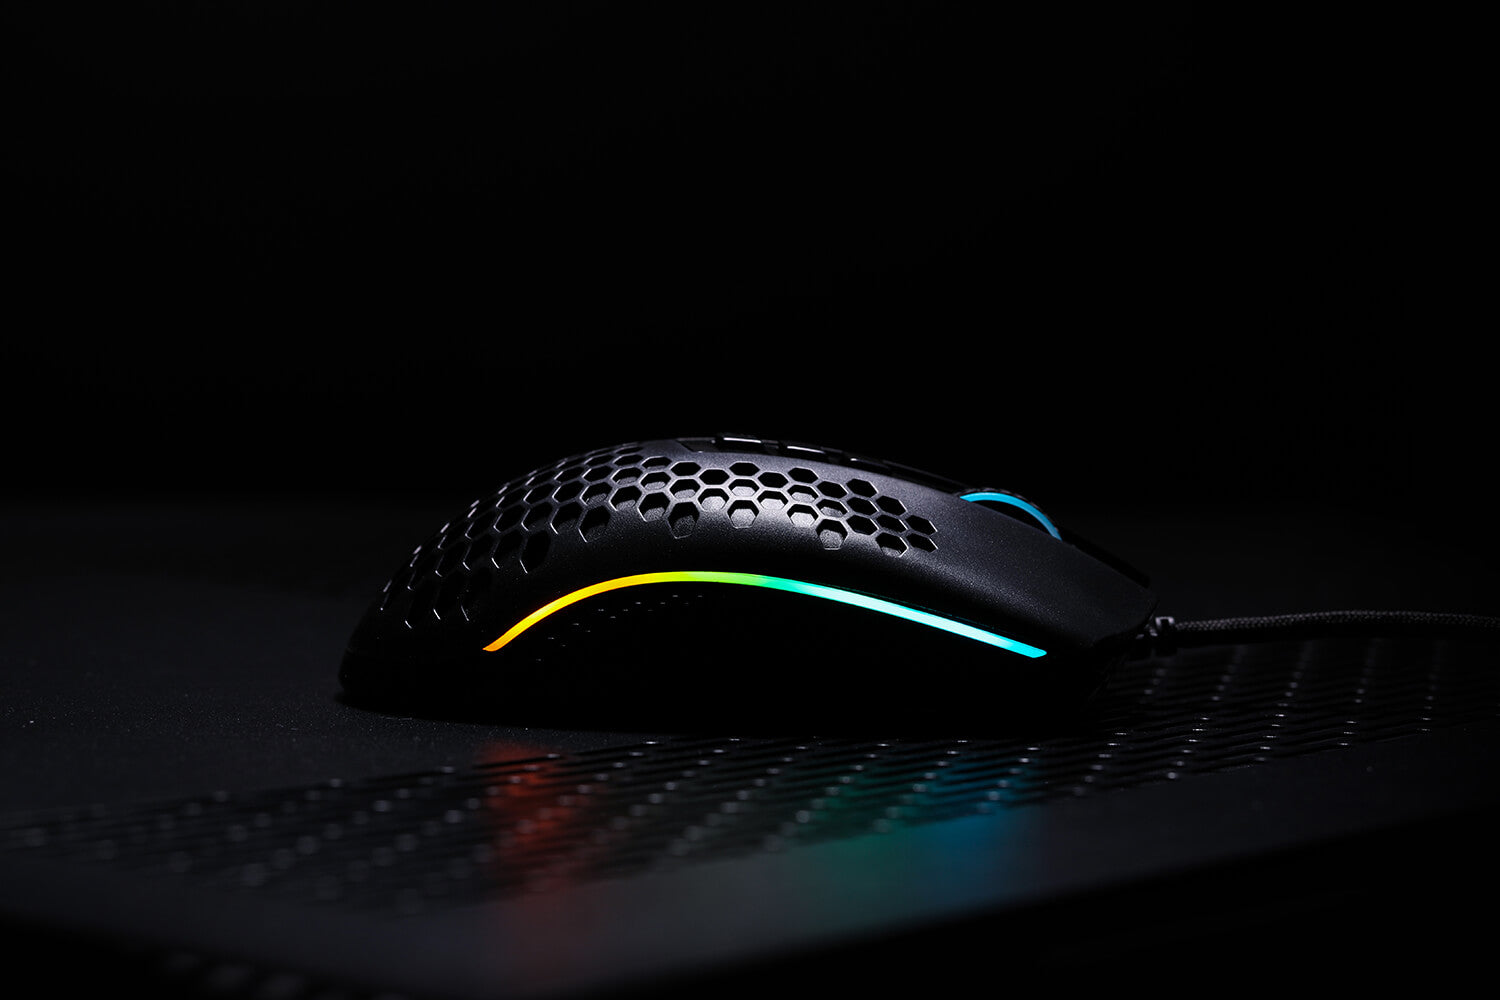 Redragon M808 Gaming Mouse 4 Redragon &Lt;H1 Id=&Quot;Title&Quot; Class=&Quot;A-Size-Large A-Spacing-None&Quot;&Gt;&Lt;Span Id=&Quot;Producttitle&Quot; Class=&Quot;A-Size-Large Product-Title-Word-Break&Quot;&Gt;Redragon M808 Storm Lightweight Rgb Gaming Mouse&Lt;/Span&Gt;&Lt;/H1&Gt; &Lt;Ul Class=&Quot;A-Unordered-List A-Vertical A-Spacing-Mini&Quot;&Gt; &Lt;Li&Gt;&Lt;Span Class=&Quot;A-List-Item&Quot;&Gt;Years-Tested Ultralight -85G, The Lightest Mouse Of Redragon With Over The Years Using Preference Testing That Welly Fits For Any Hands And Any Tasks. A Single Click Or Swipe, Totally In Your Control.&Lt;/Span&Gt;&Lt;/Li&Gt; &Lt;Li&Gt;&Lt;Span Class=&Quot;A-List-Item&Quot;&Gt;Aesthetics Of Hive - The Cutout Honeycomb Shell Covered With Comfy Frosted Finish Gets You The Essential Buff For Pro, Offers Unlimited Possibilities And Infinite Potential To Maximize Your Aim.&Lt;/Span&Gt;&Lt;/Li&Gt; &Lt;Li&Gt;&Lt;Span Class=&Quot;A-List-Item&Quot;&Gt;No-Drag Weave Cable - Not Only The Material And Design Of The Mouse Itself, But Also The Cable Is Made Of The Lightest Material To Kill The Weight And The Friction As Much As Possible.&Lt;/Span&Gt;&Lt;/Li&Gt; &Lt;Li&Gt;&Lt;Span Class=&Quot;A-List-Item&Quot;&Gt;7 Programmable Buttons - All Buttons Are Available For Redefinition And Assignment Of Complex Macro Keybindings, Easy To Deal With Any Impossible Mission That Comes Your Way.&Lt;/Span&Gt;&Lt;/Li&Gt; &Lt;Li&Gt;&Lt;Span Class=&Quot;A-List-Item&Quot;&Gt;Sets Your Dpi/Rgb - 100 To 12400 Dpi And 16.8 Million Colors Are All Customizable With Software Support, Engineer Your Liked Way To Win.&Lt;/Span&Gt;&Lt;/Li&Gt; &Lt;/Ul&Gt; Gaming Mouse Redragon M808 Gaming Mouse